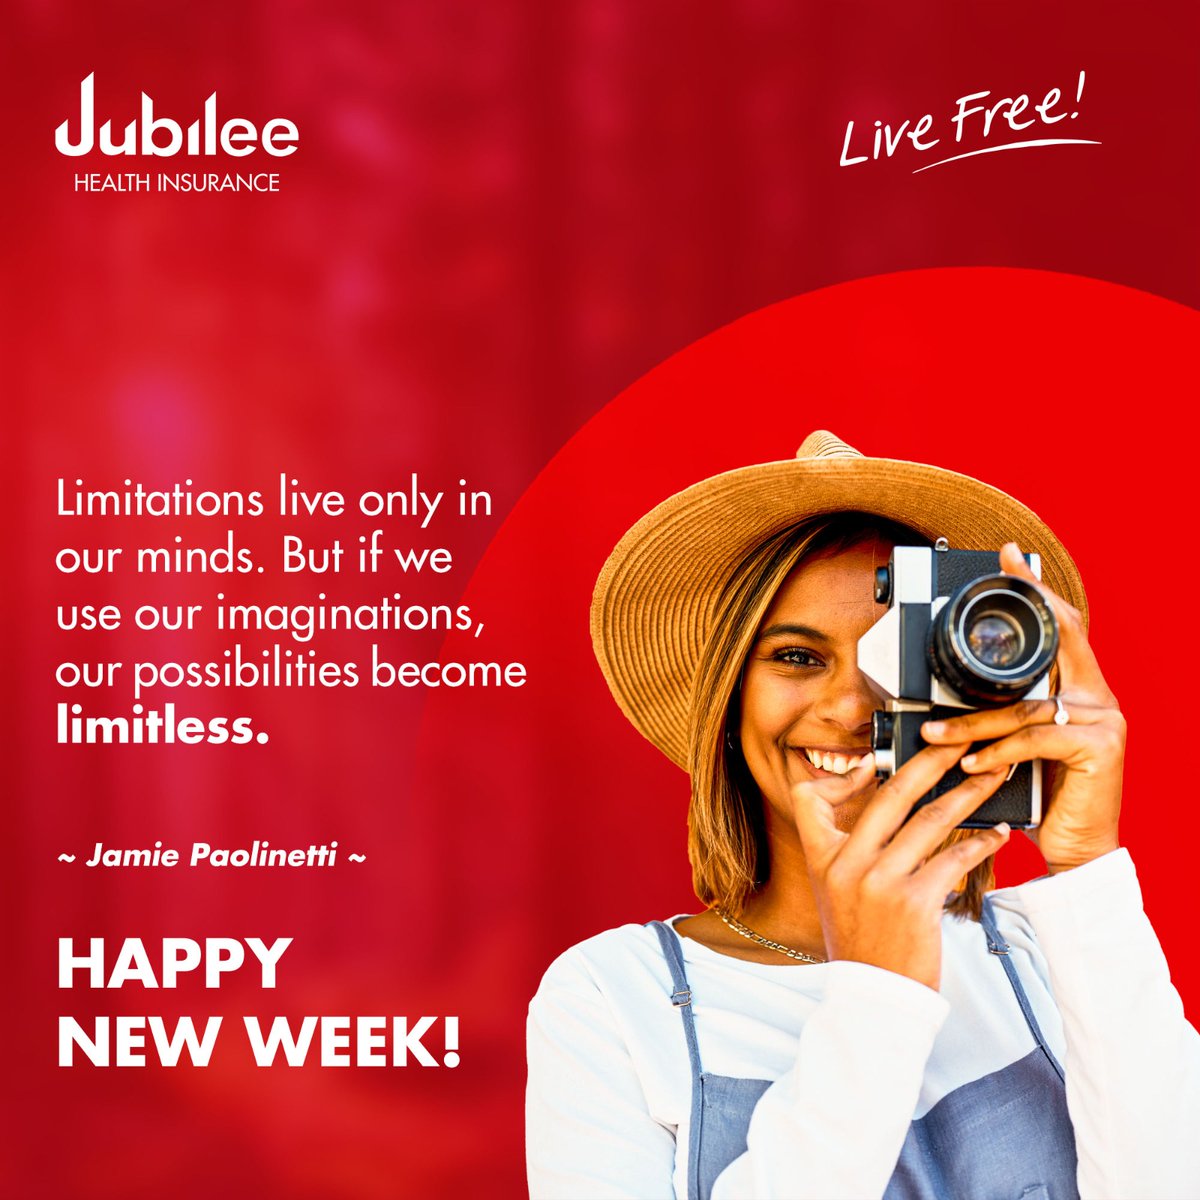 This week, break free from the ordinary. 
Embrace the possibilities and live life to the fullest. 

#LiveFree #JubileeHealth #MondayMotivation